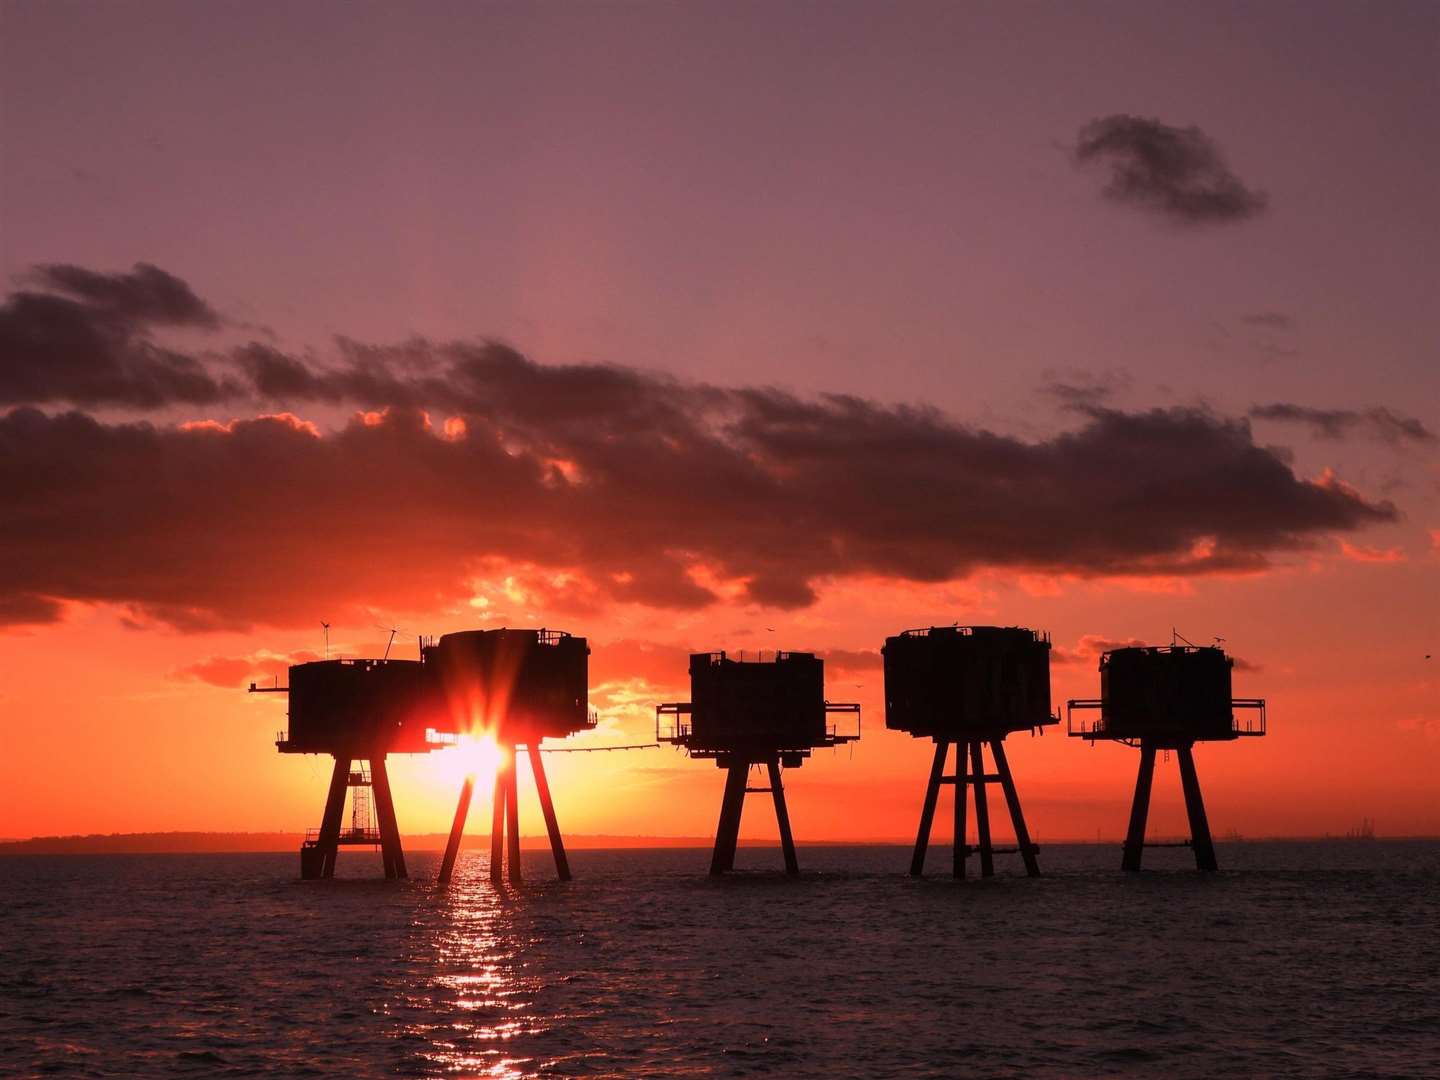 The Second World War Maunsell sea forts at sunset from the Sheppey-based X-Pilot boat. Picture: Margaret 'Flo' McEwan